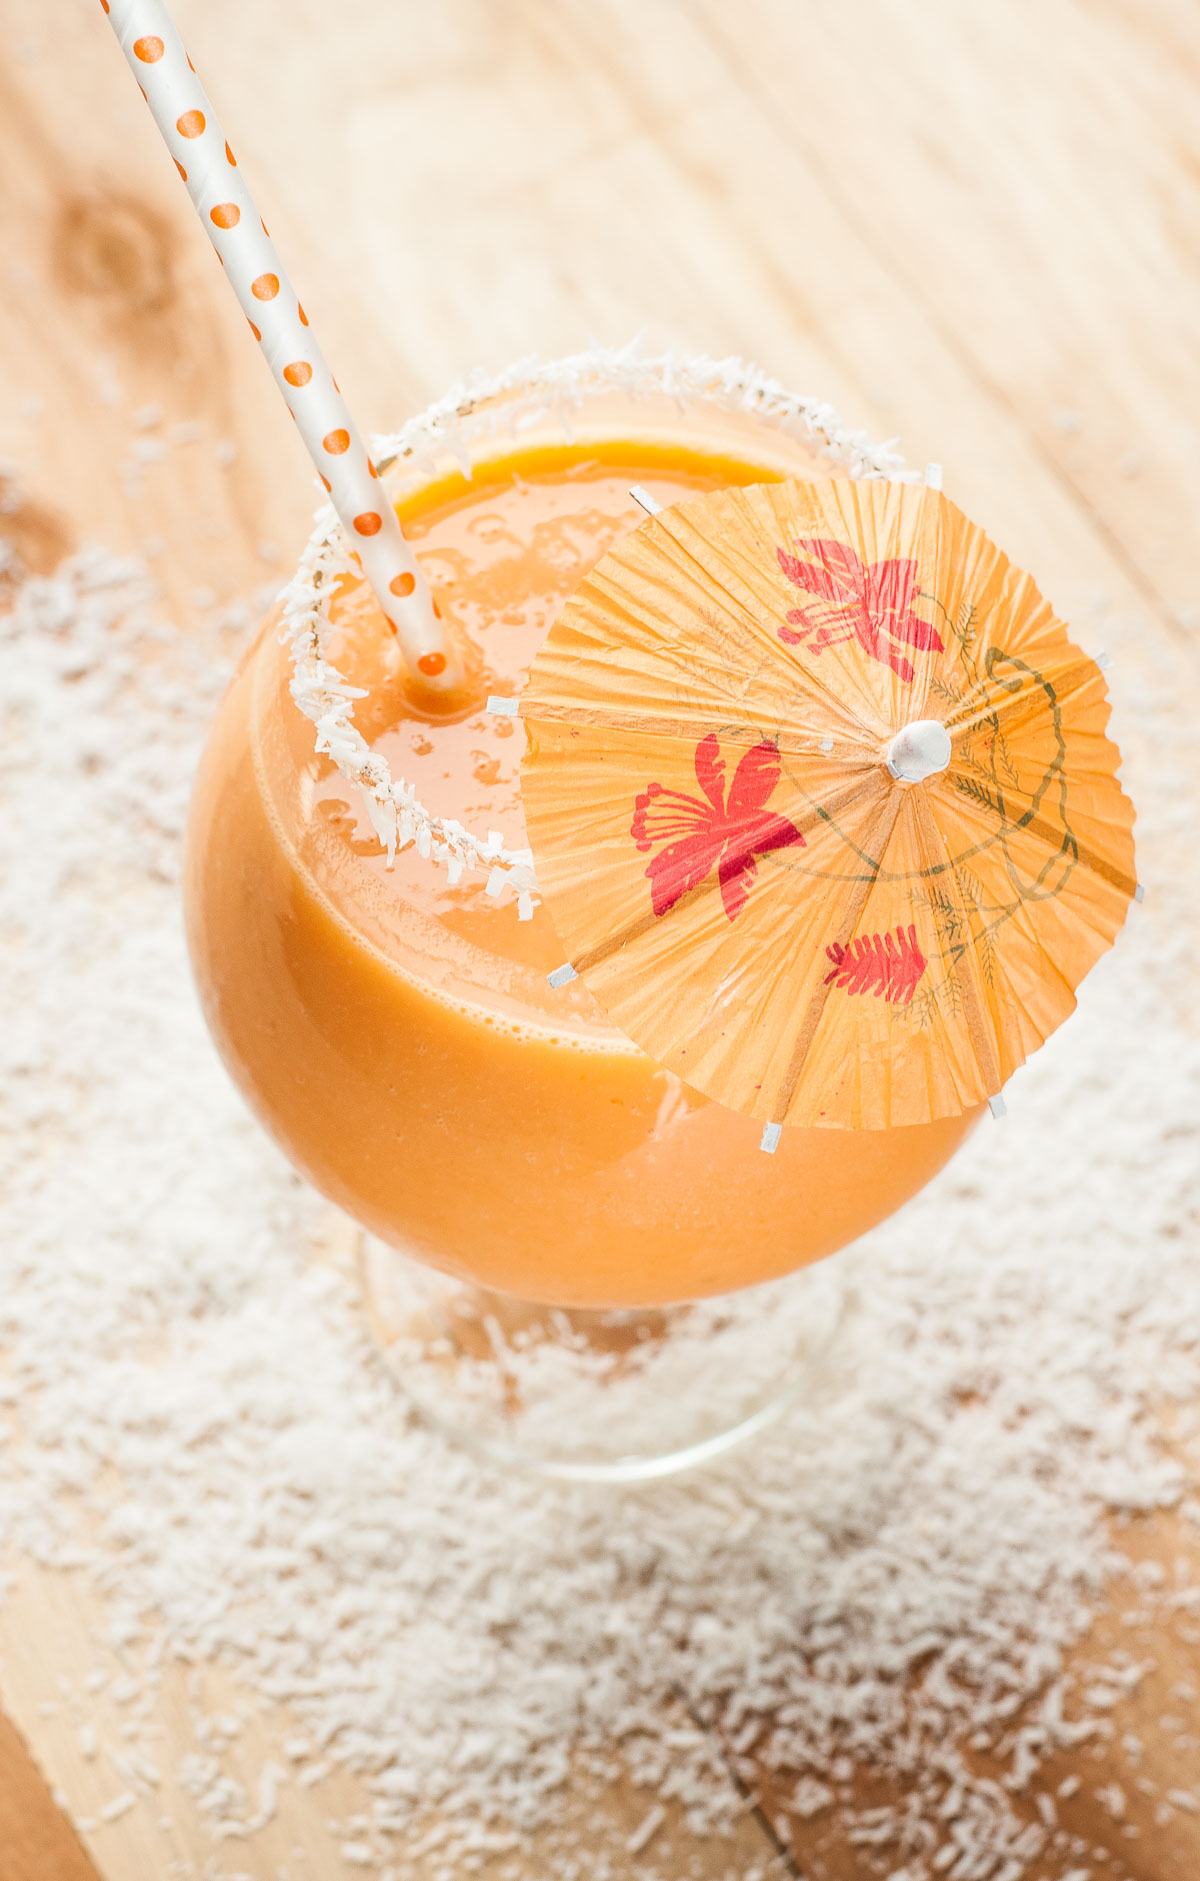 This tasty tropical pineapple carrot smoothie is ready to liven up your grab-and-go breakfast routine!